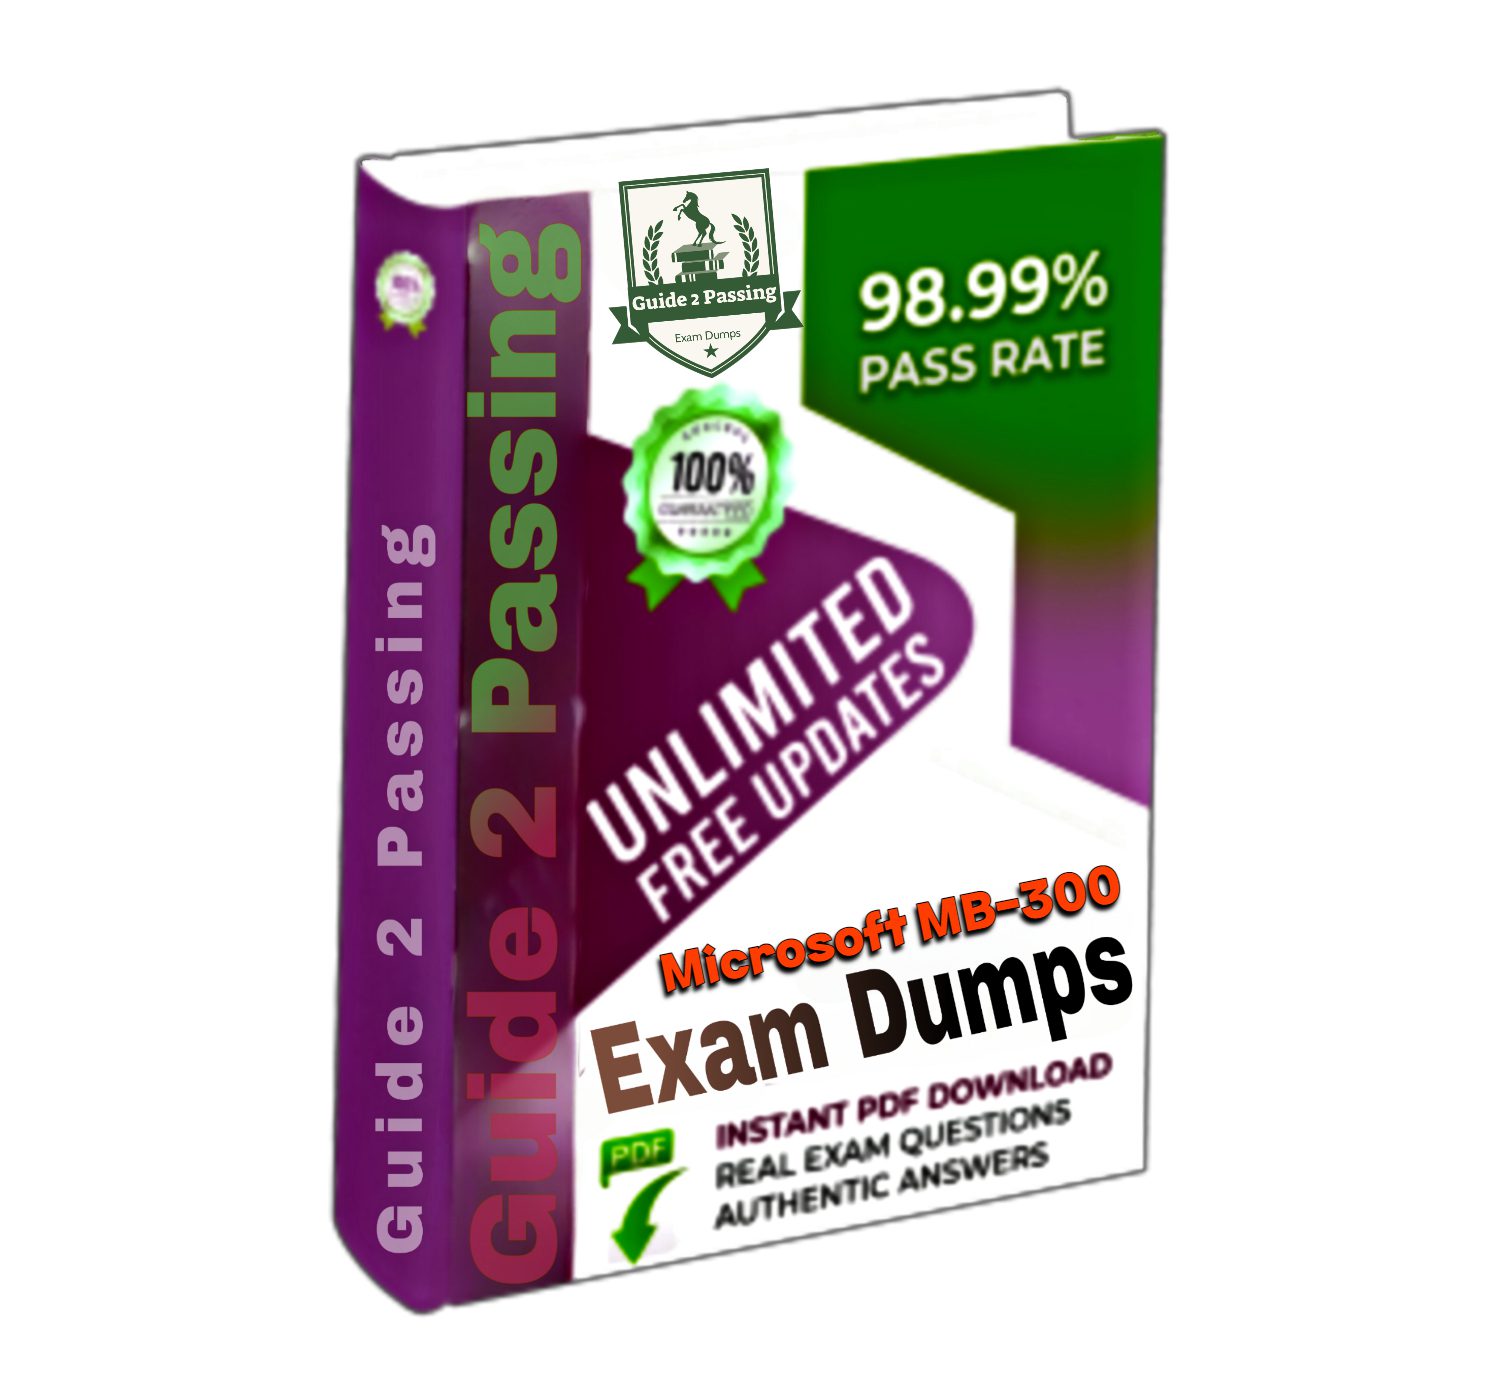 Pass Your Microsoft MB-300 Exam Dumps From Guide 2 Passing